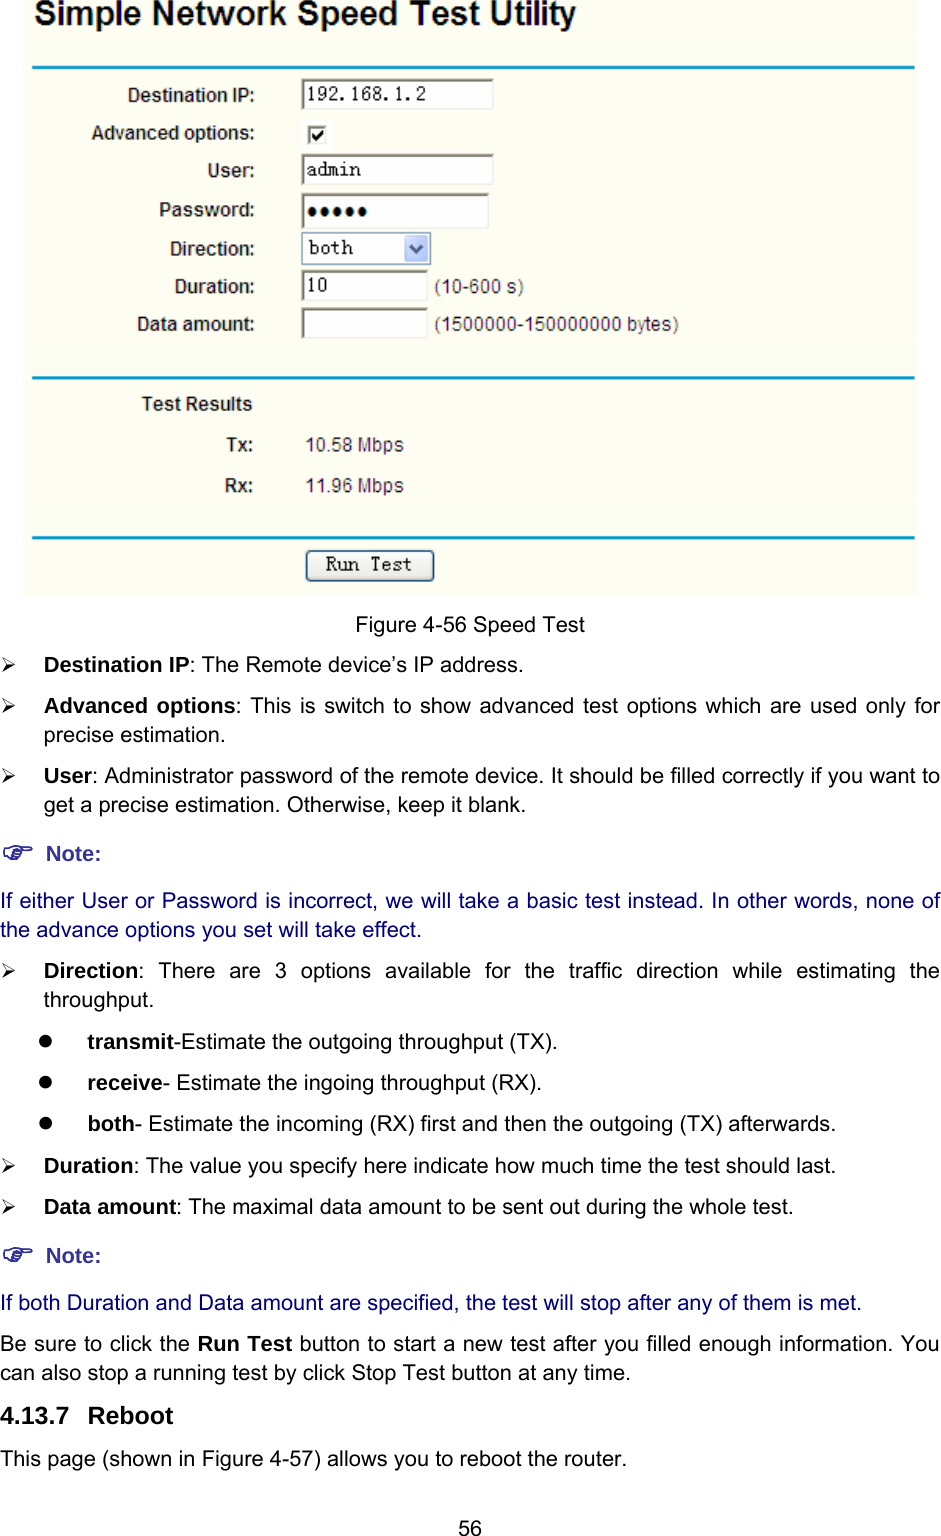  56  Figure 4-56 Speed Test ¾ Destination IP: The Remote device’s IP address. ¾ Advanced options: This is switch to show advanced test options which are used only for precise estimation. ¾ User: Administrator password of the remote device. It should be filled correctly if you want to get a precise estimation. Otherwise, keep it blank. ) Note: If either User or Password is incorrect, we will take a basic test instead. In other words, none of the advance options you set will take effect. ¾ Direction: There are 3 options available for the traffic direction while estimating the throughput. z transmit-Estimate the outgoing throughput (TX). z receive- Estimate the ingoing throughput (RX). z both- Estimate the incoming (RX) first and then the outgoing (TX) afterwards. ¾ Duration: The value you specify here indicate how much time the test should last. ¾ Data amount: The maximal data amount to be sent out during the whole test. ) Note: If both Duration and Data amount are specified, the test will stop after any of them is met. Be sure to click the Run Test button to start a new test after you filled enough information. You can also stop a running test by click Stop Test button at any time. 4.13.7  Reboot This page (shown in Figure 4-57) allows you to reboot the router. 